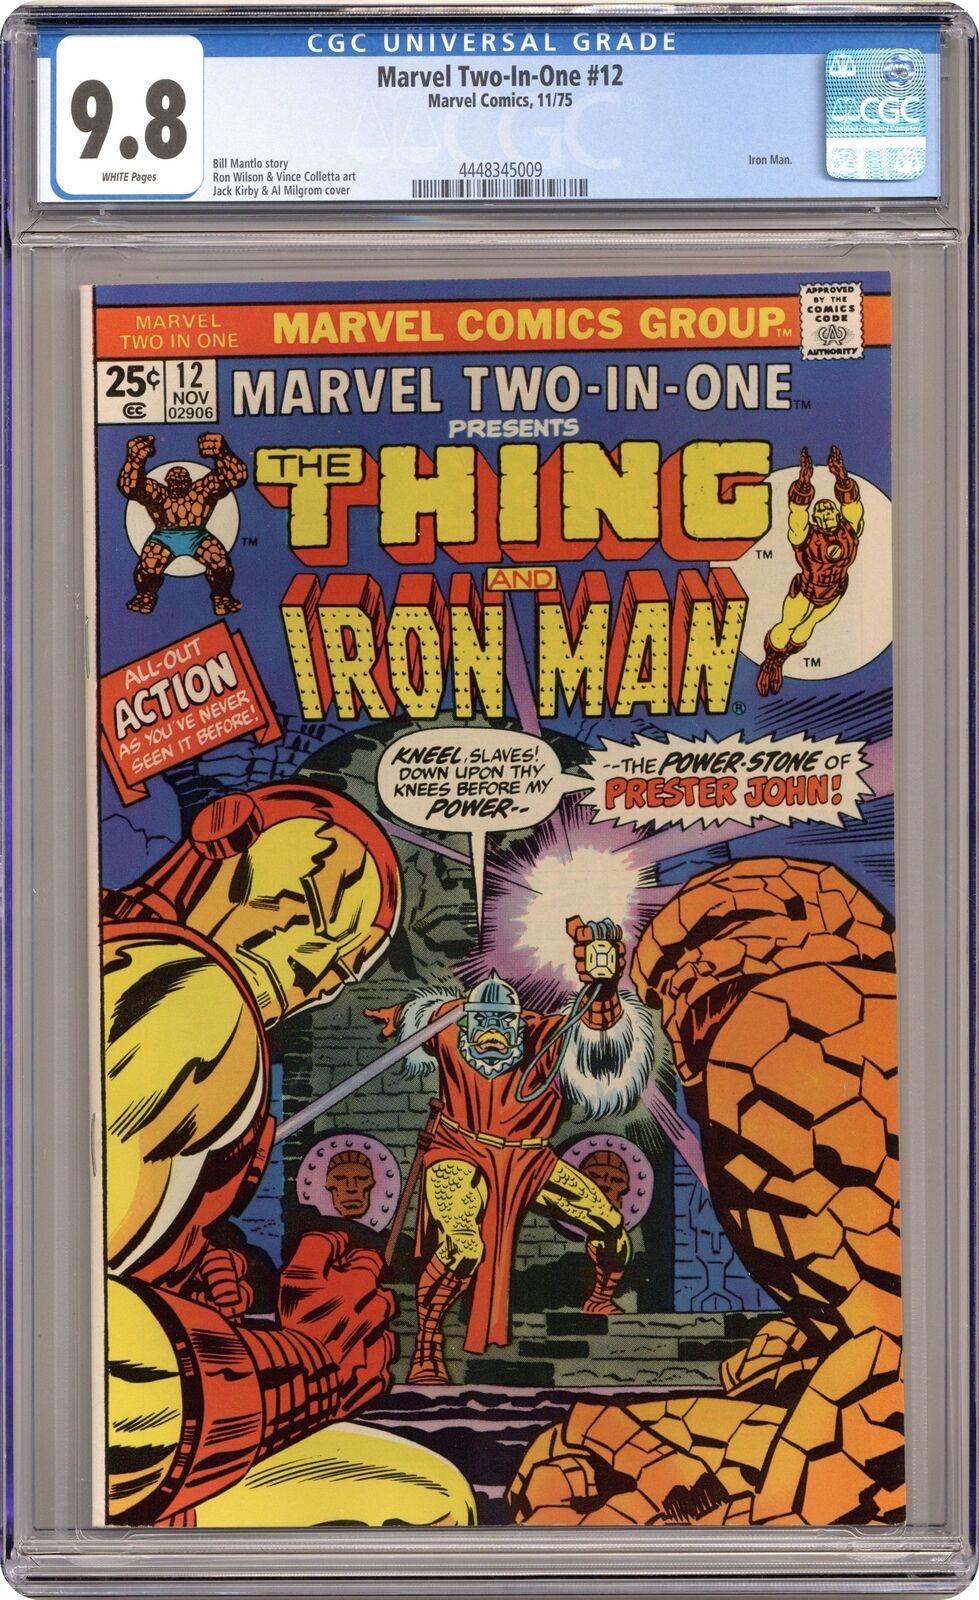 Marvel Two-in-One #12 CGC 9.8 1975 4448345009